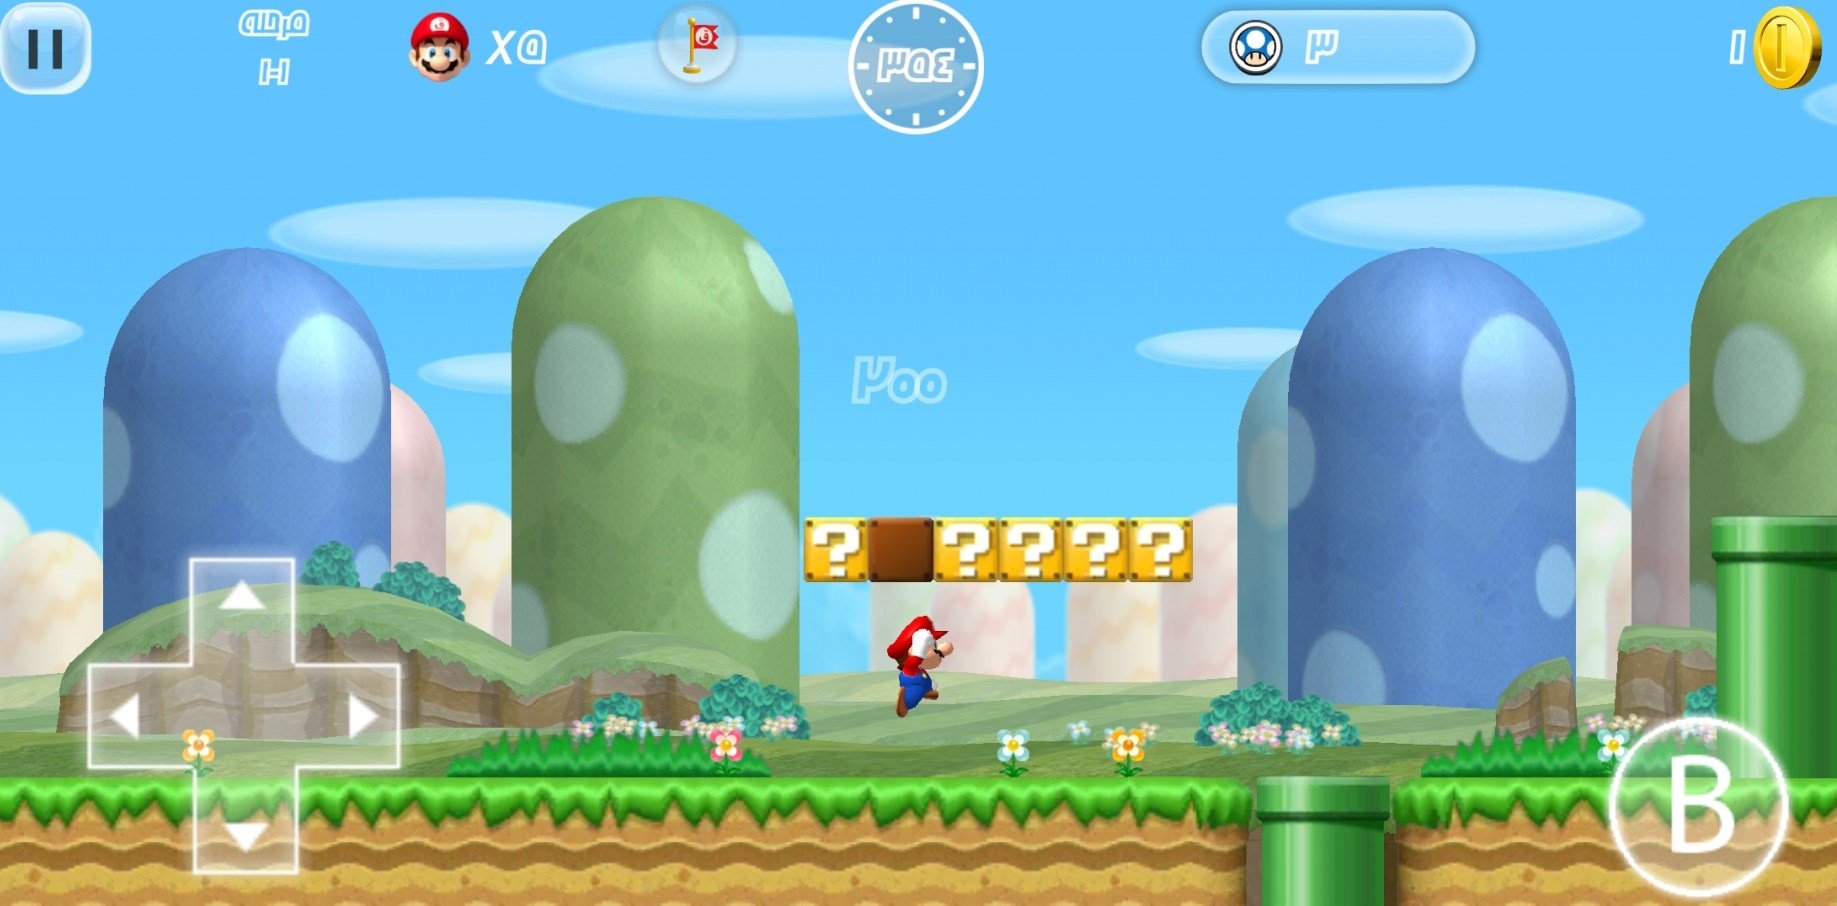 new super mario bros apk for android